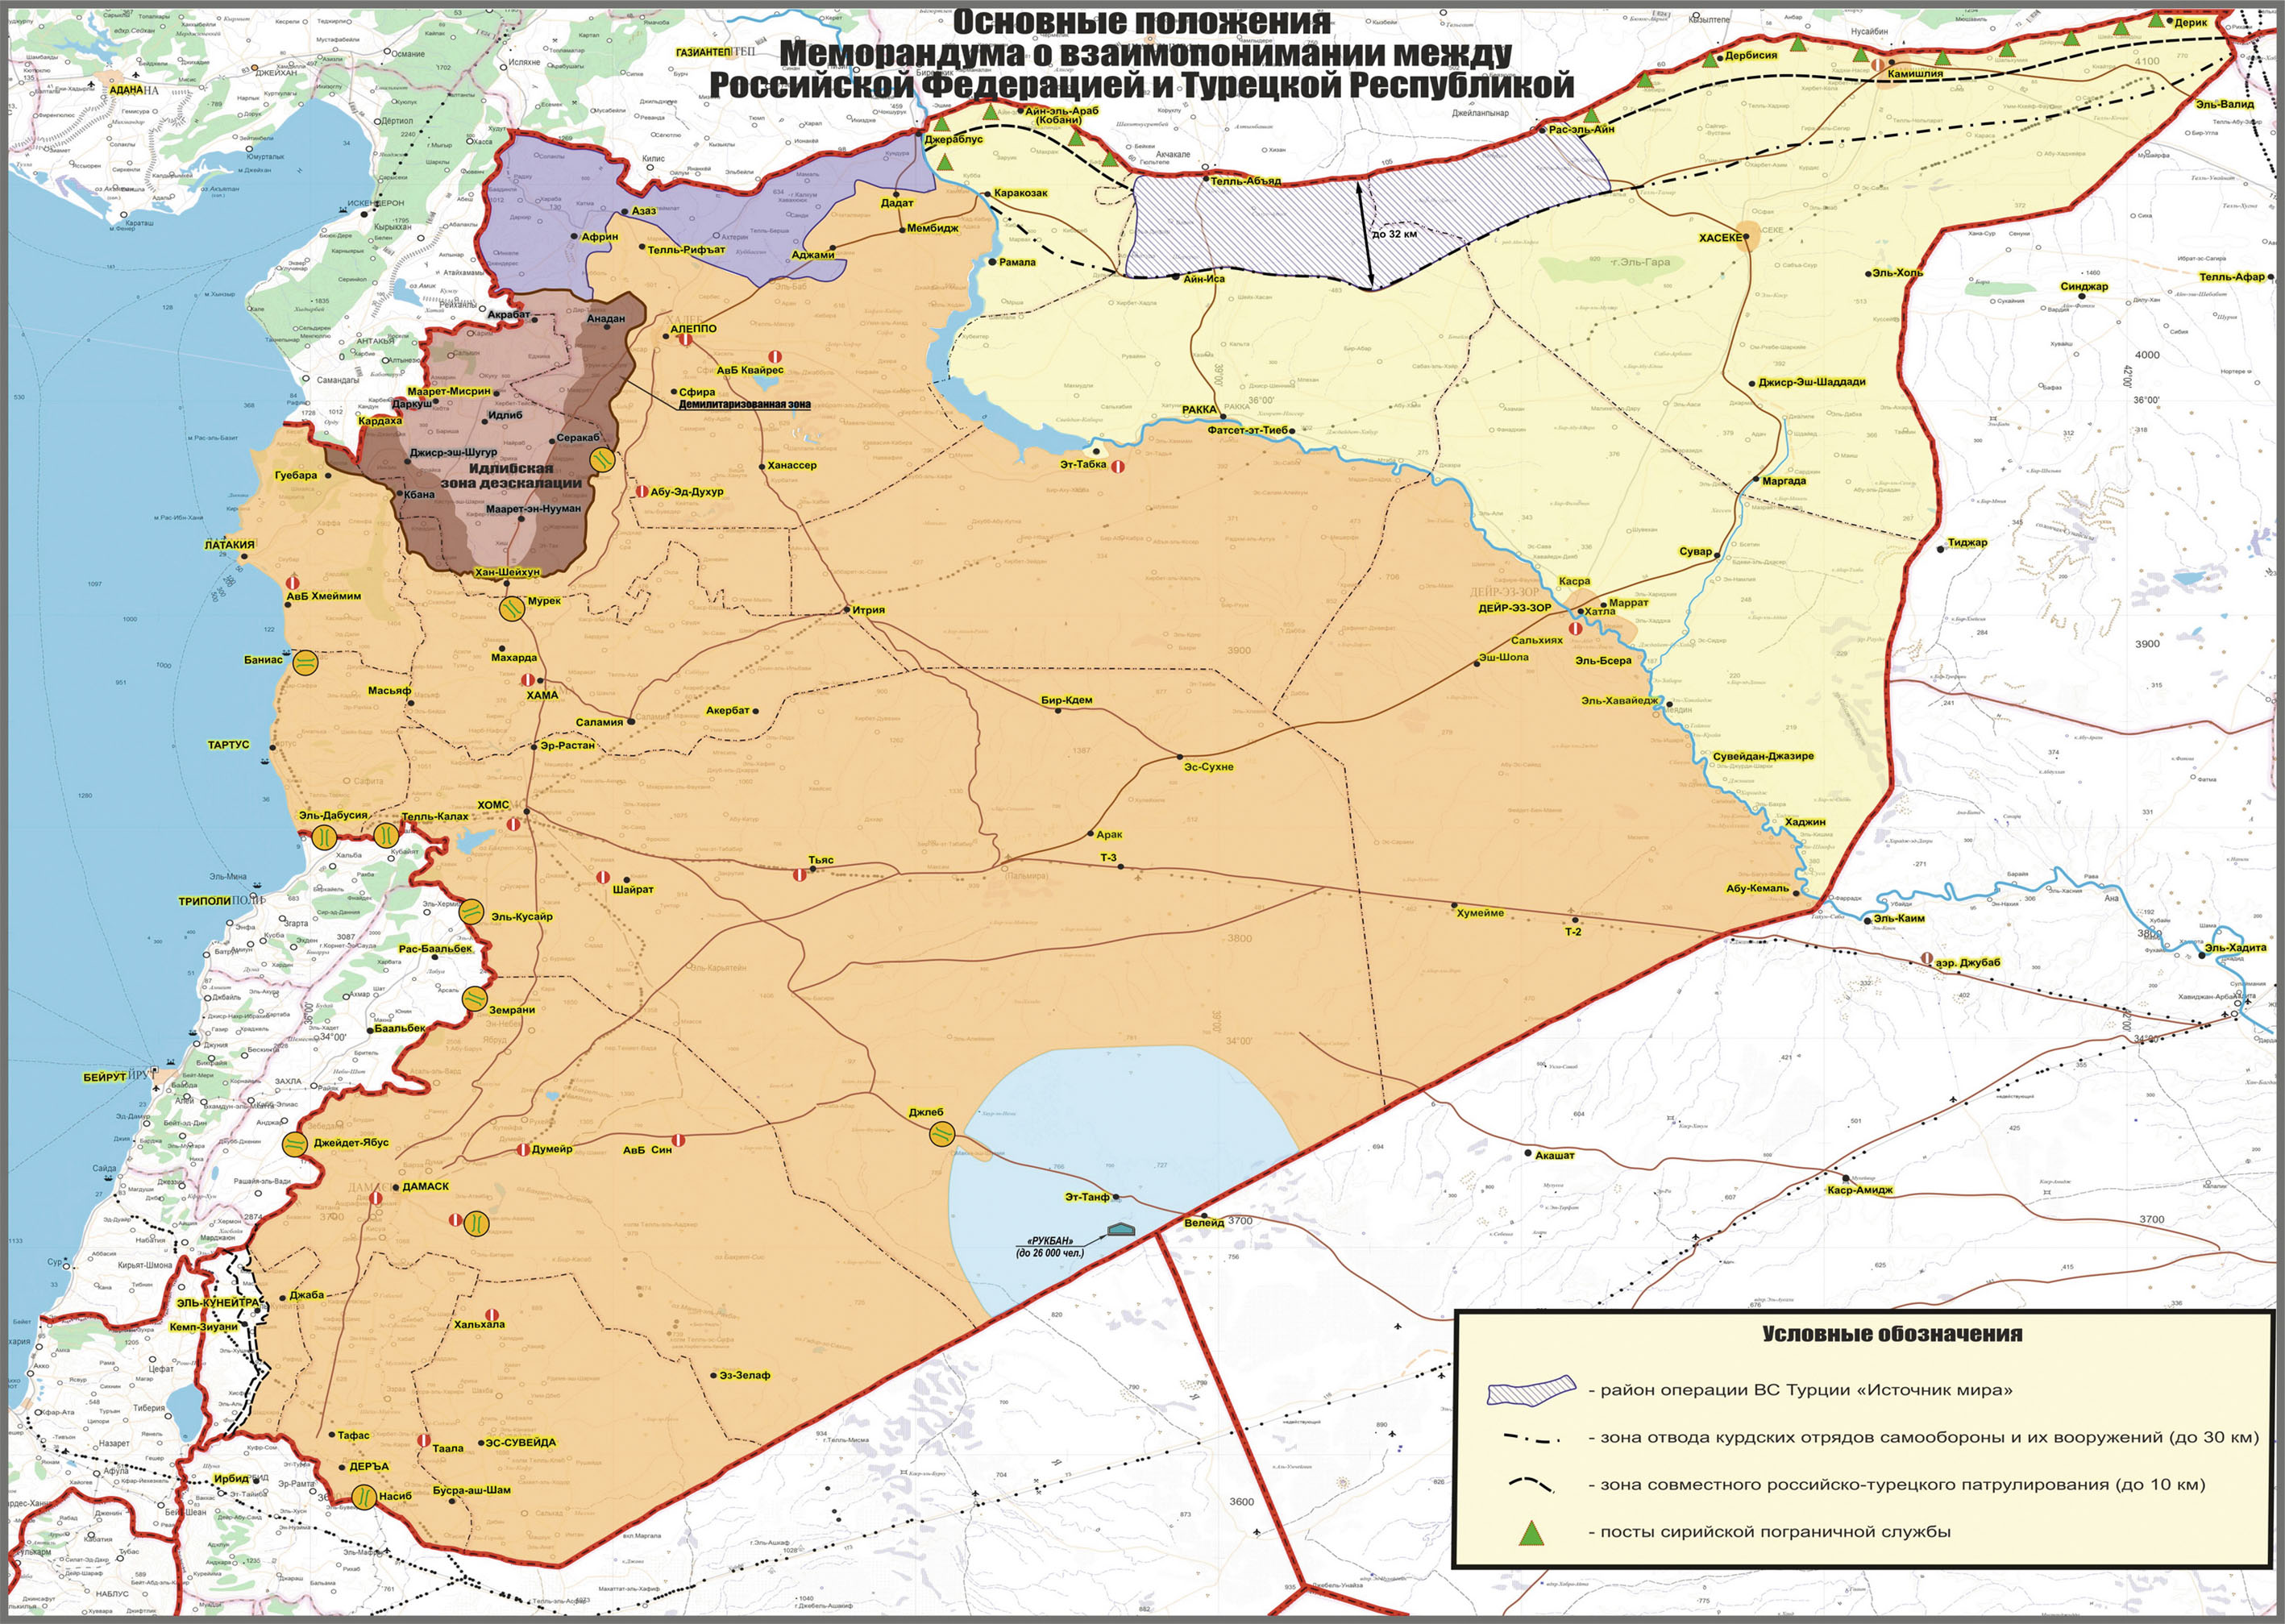 A map released by the Russian Ministry of Defence on 24 October of the zones of control in northeast Syria as agreed by the Russian and Turkish presidents during their meeting in Sochi two days earlier. (Russian Ministry of Defence)